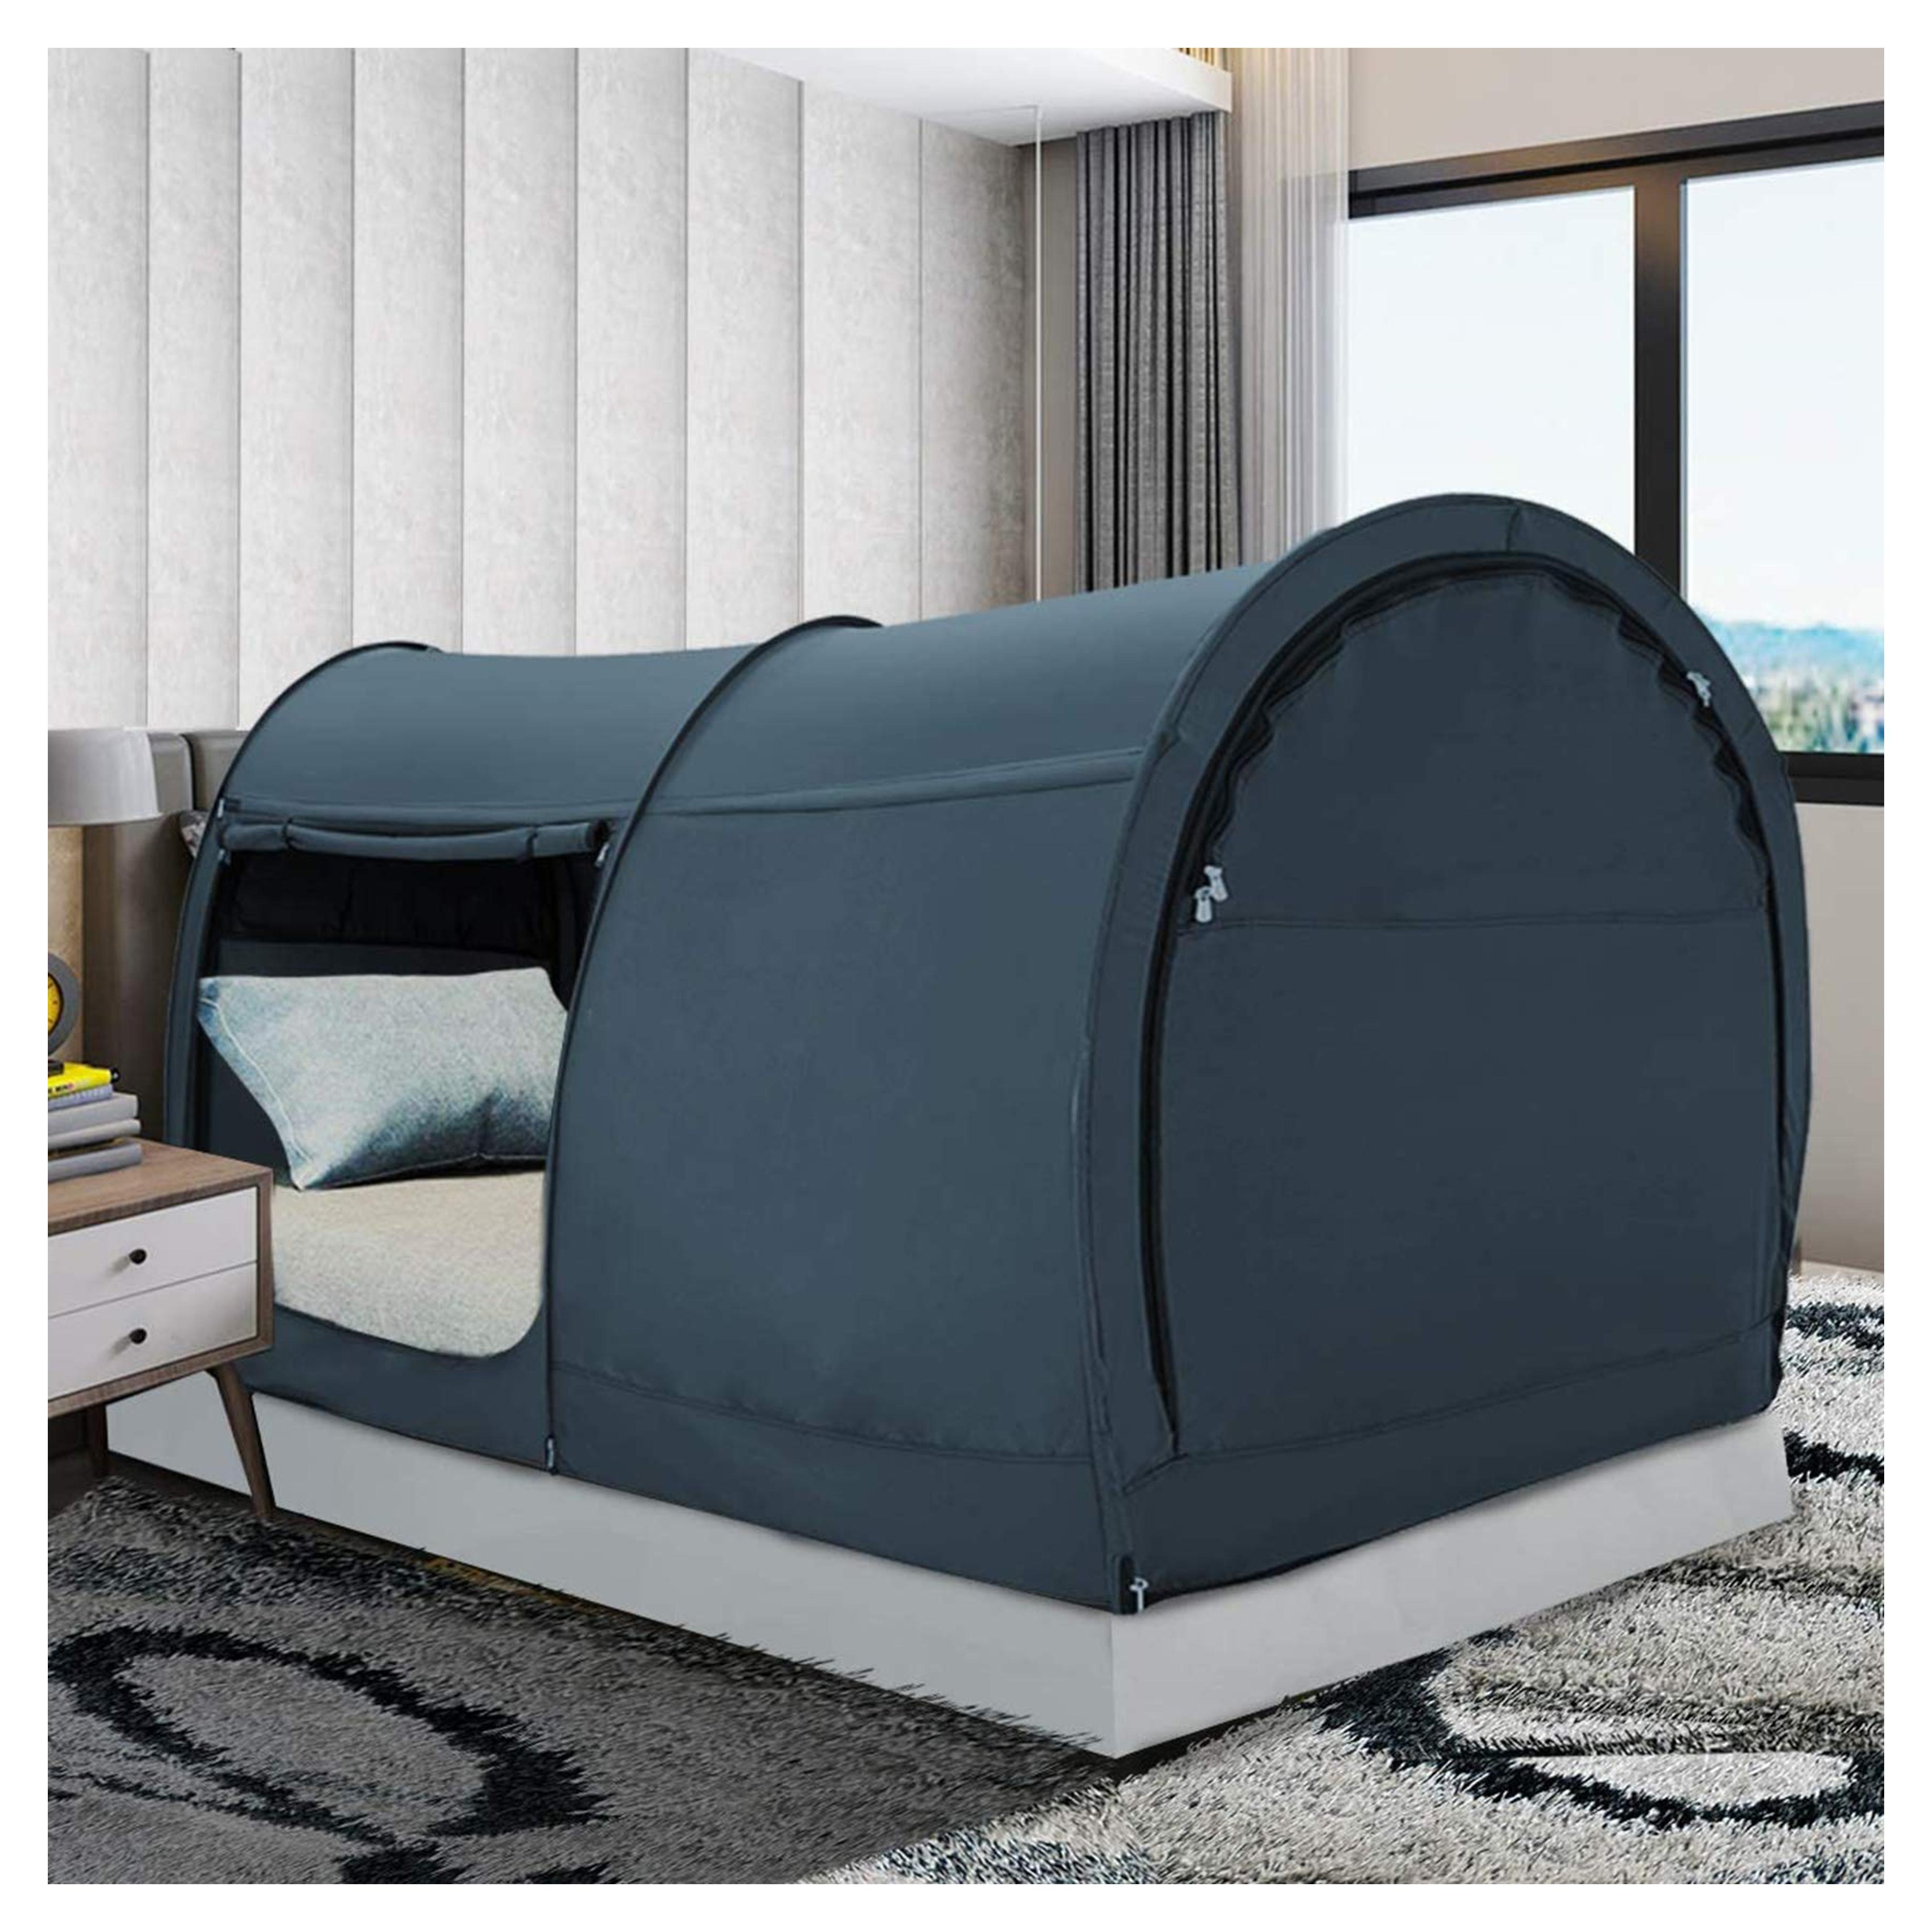 Amazon.com: LEEDOR Bed Tent Dream Tents Bed Canopy Shelter Cabin Indoor Privacy Warm Breathable Pop Up Twin Size for Kids and Adult Patent Pending PitchBlack(Mattress Not Included) : Home & Kitchen